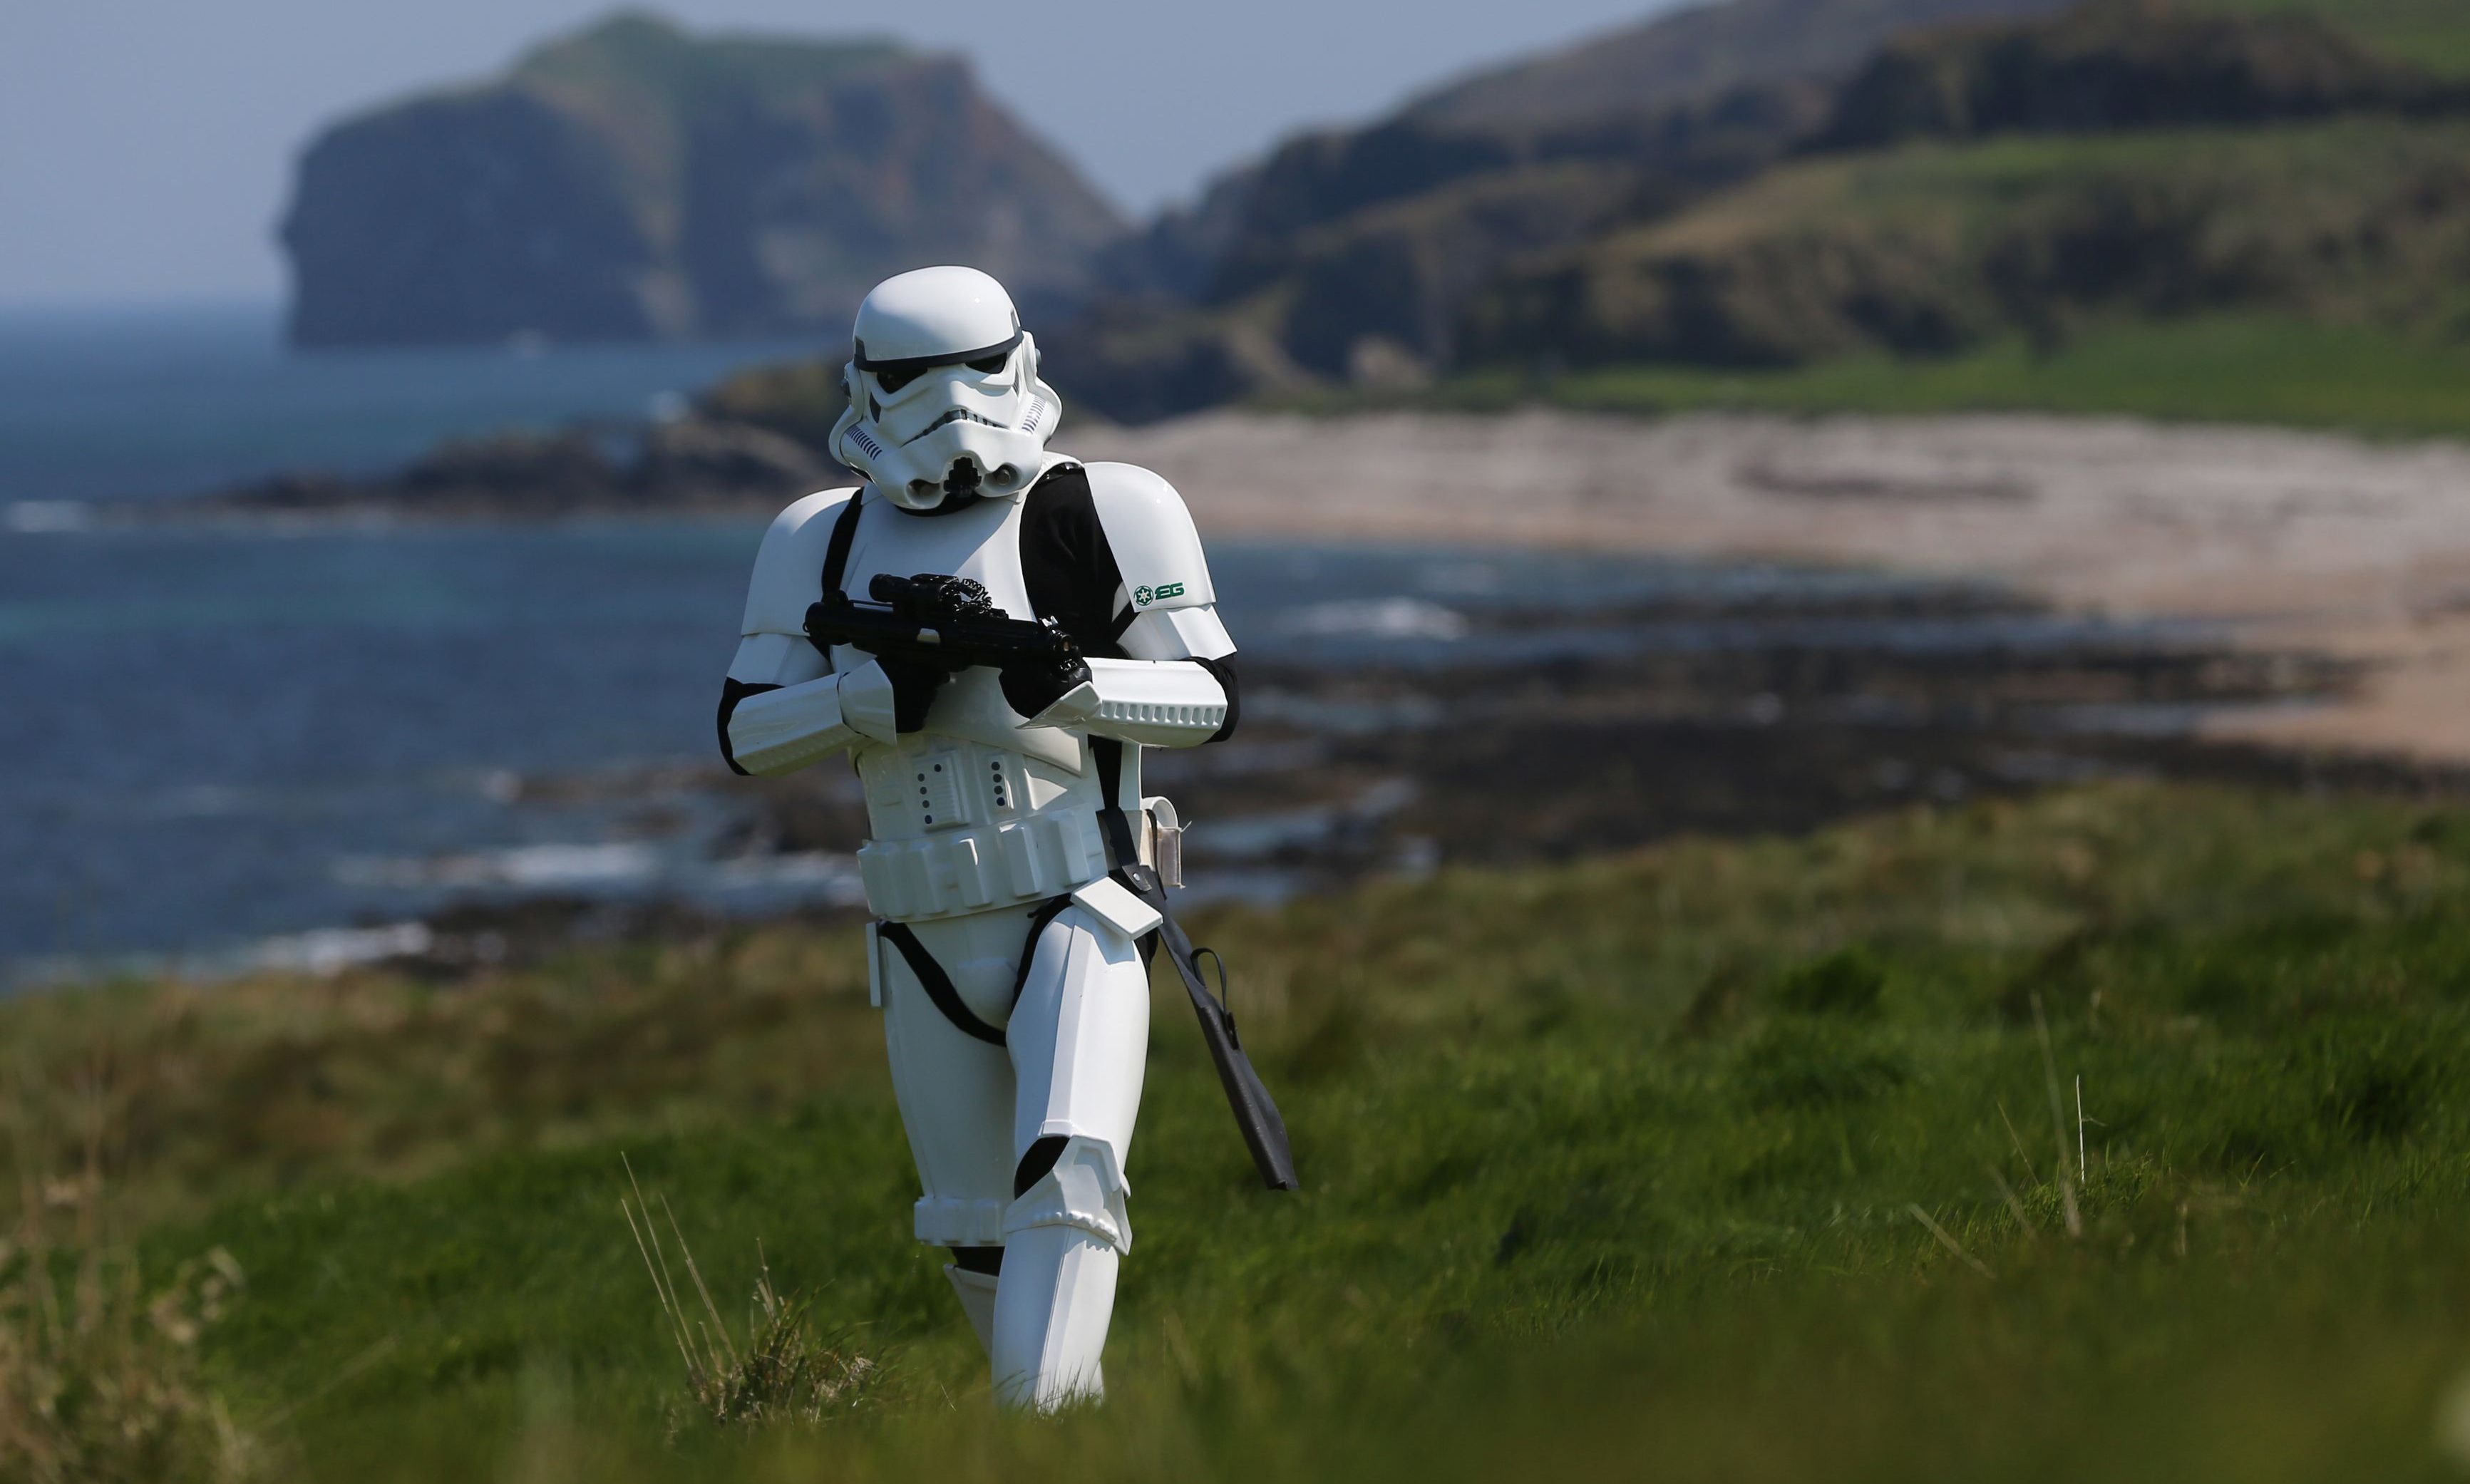 The new studio could bring major productions like Star Wars to Perthshire. JJ McGettigan from the Emerald Garrison, a star Wars costuming club, in Malin Head, Co Donegal Ireland.